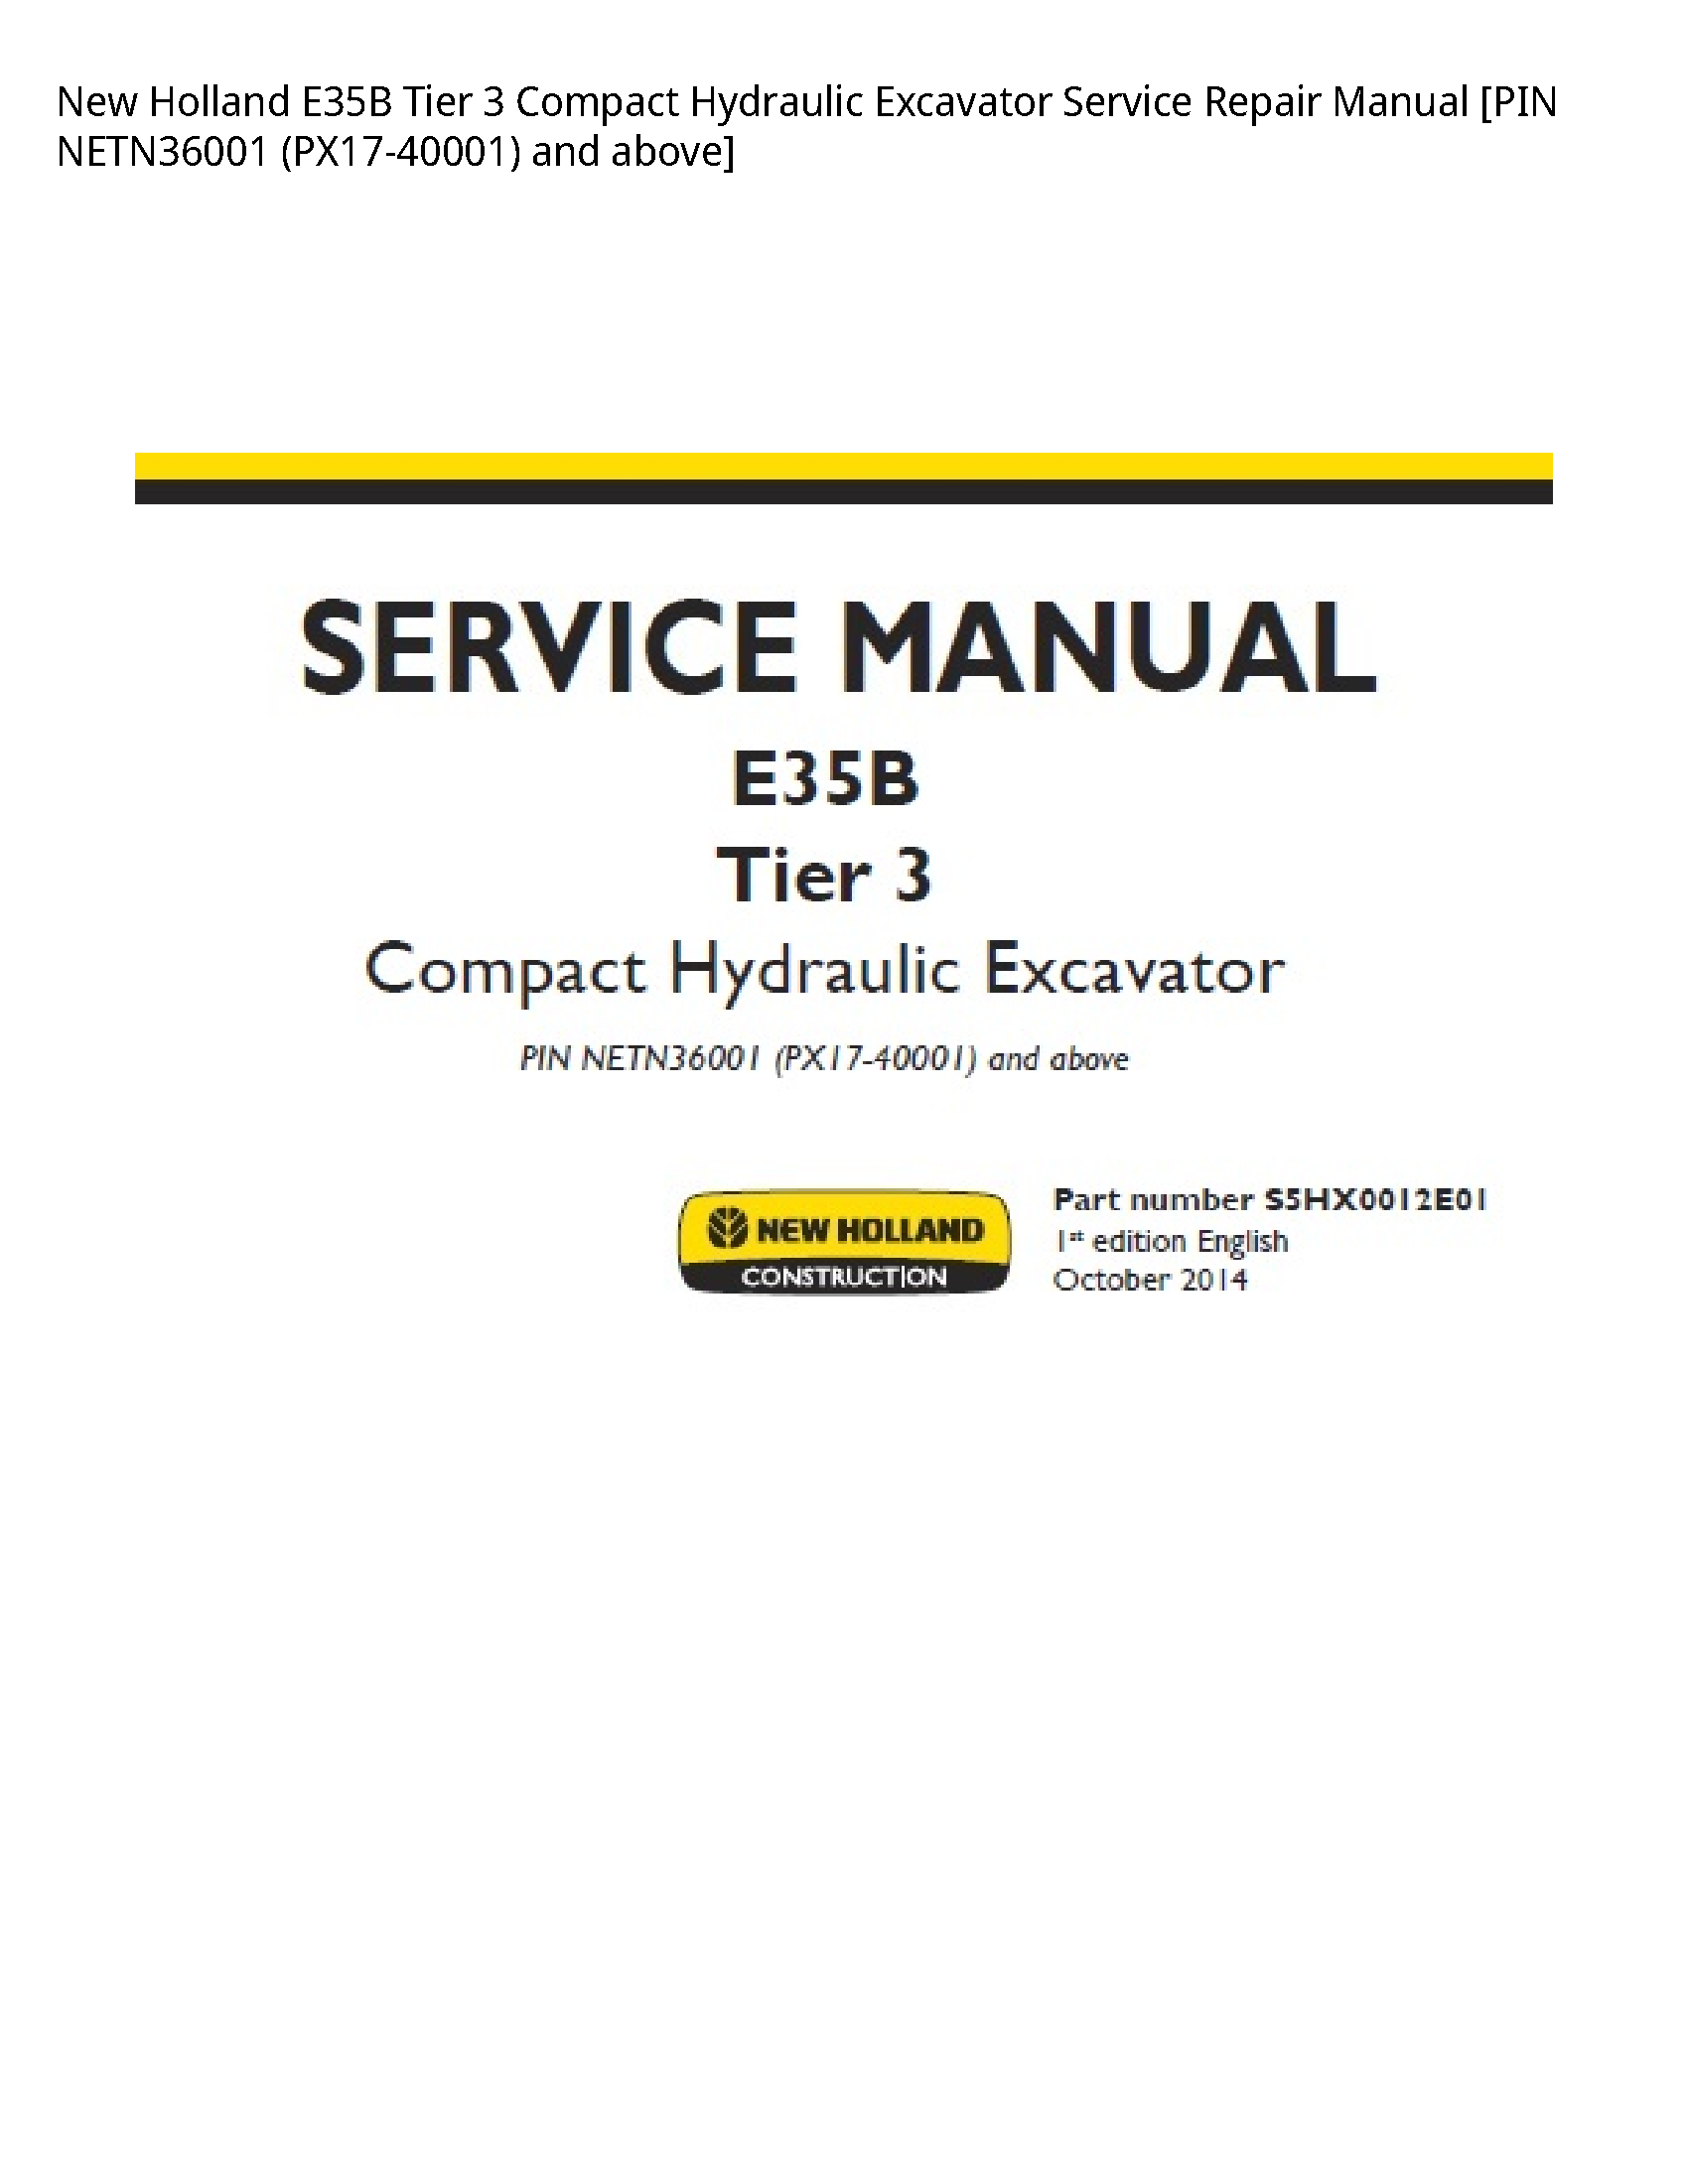 New Holland E35B Tier Compact Hydraulic Excavator manual